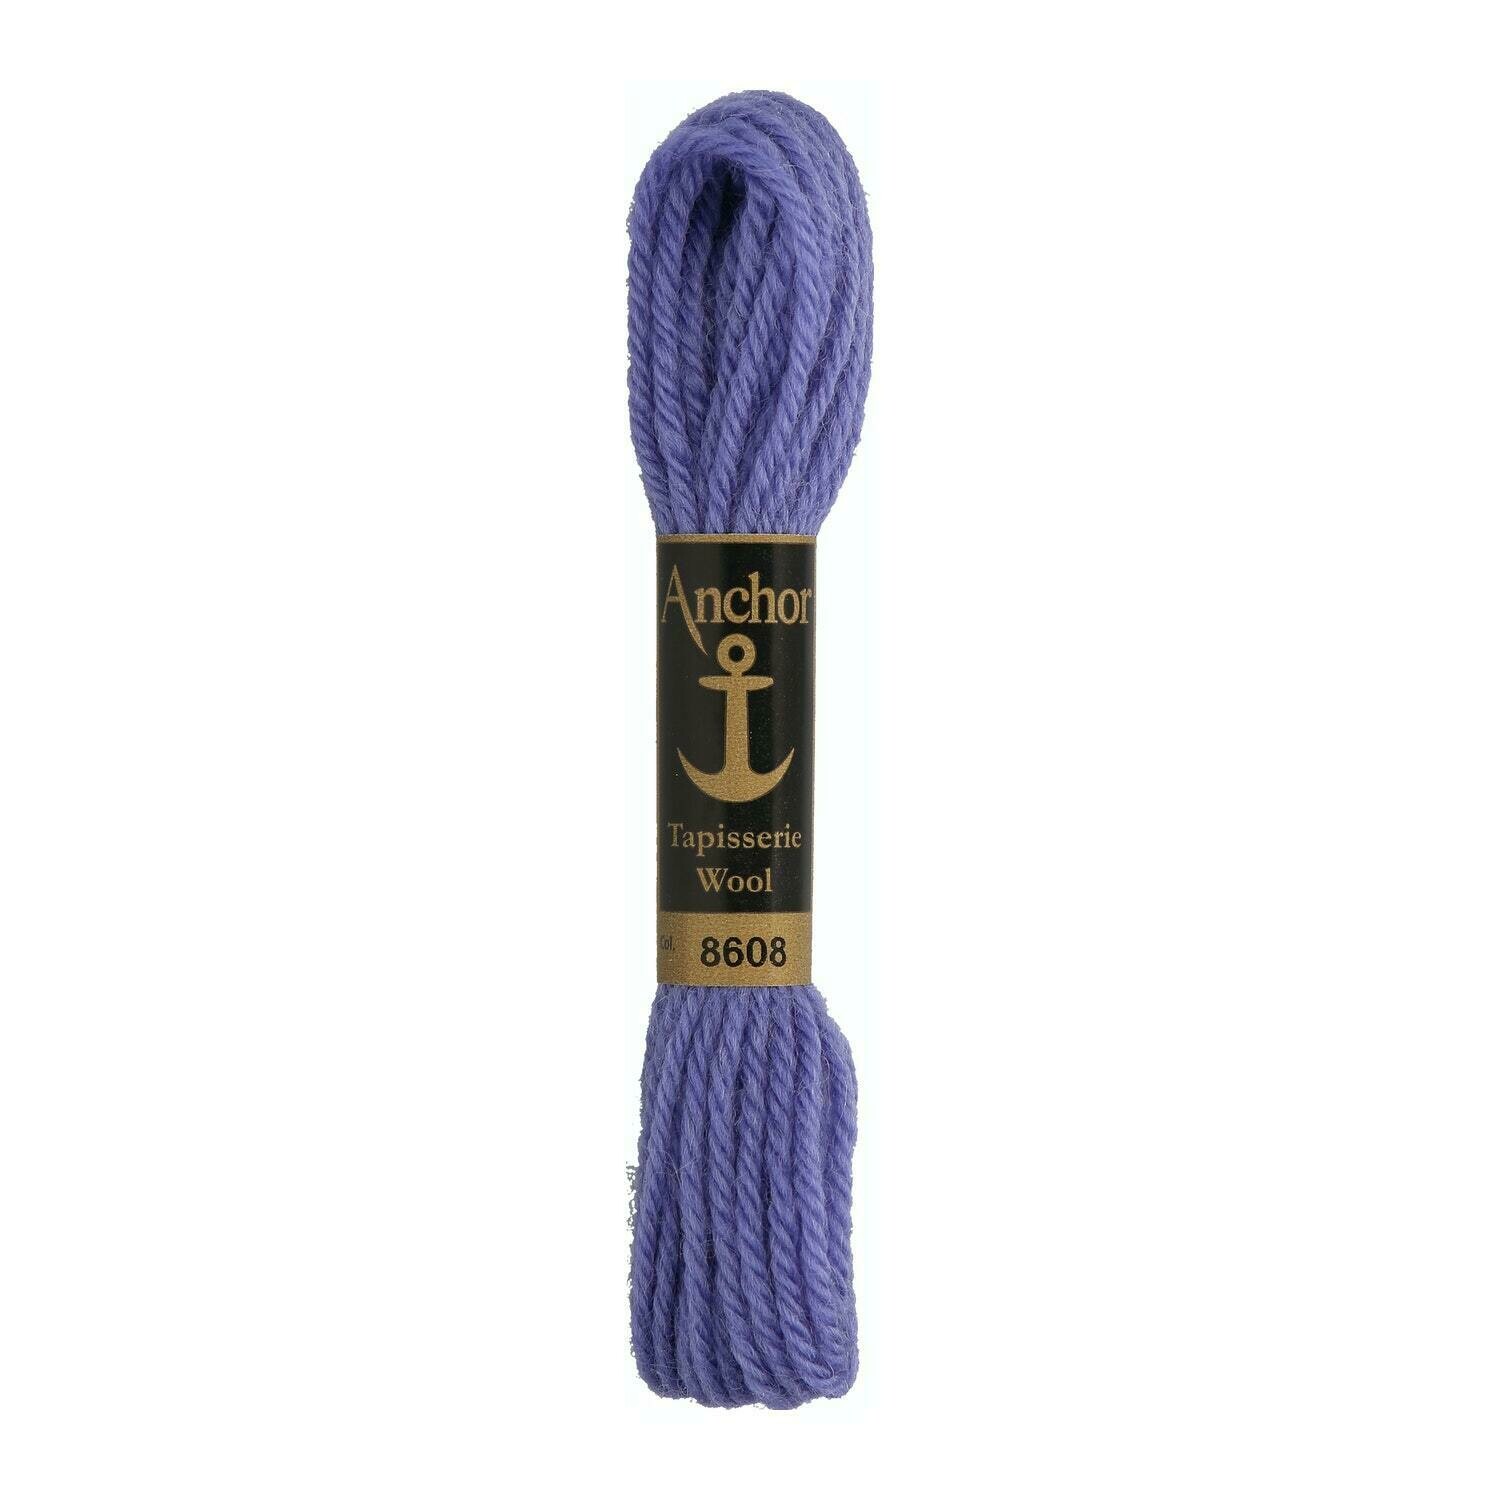 Anchor Tapisserie Wool #08608